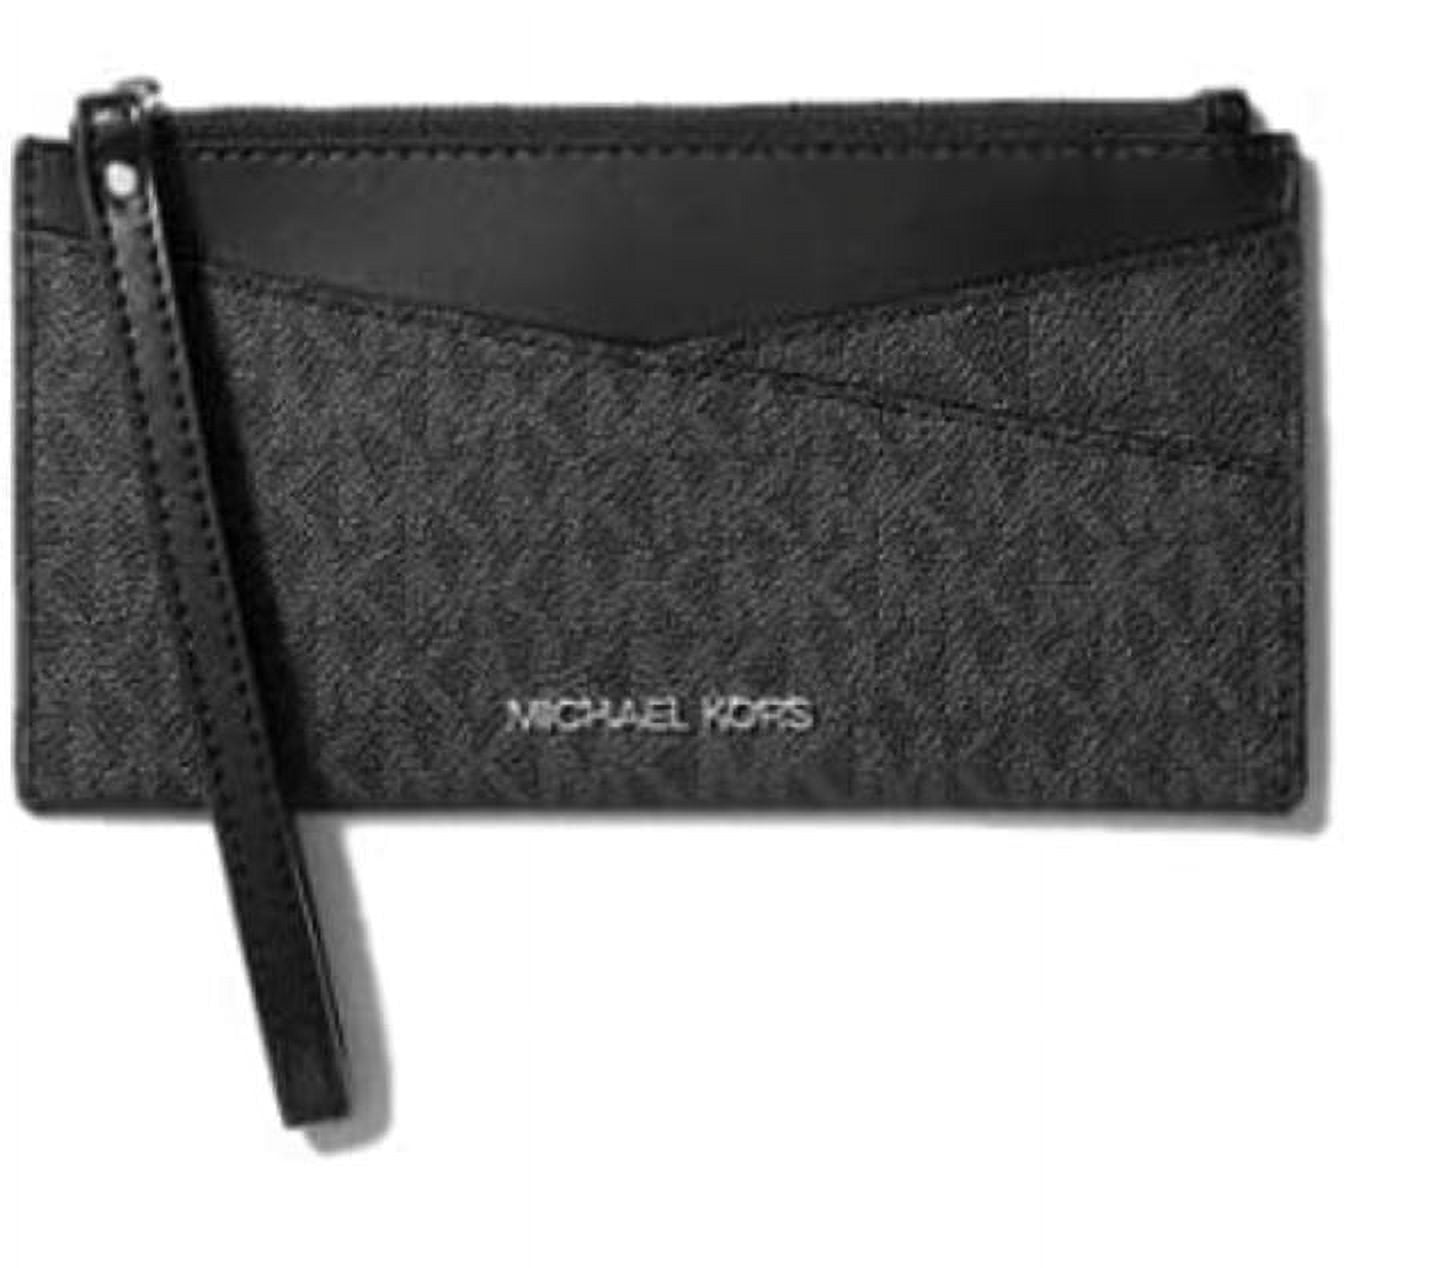 Michael Kors Jet Set Medium Saffiano Leather Wallet in Red